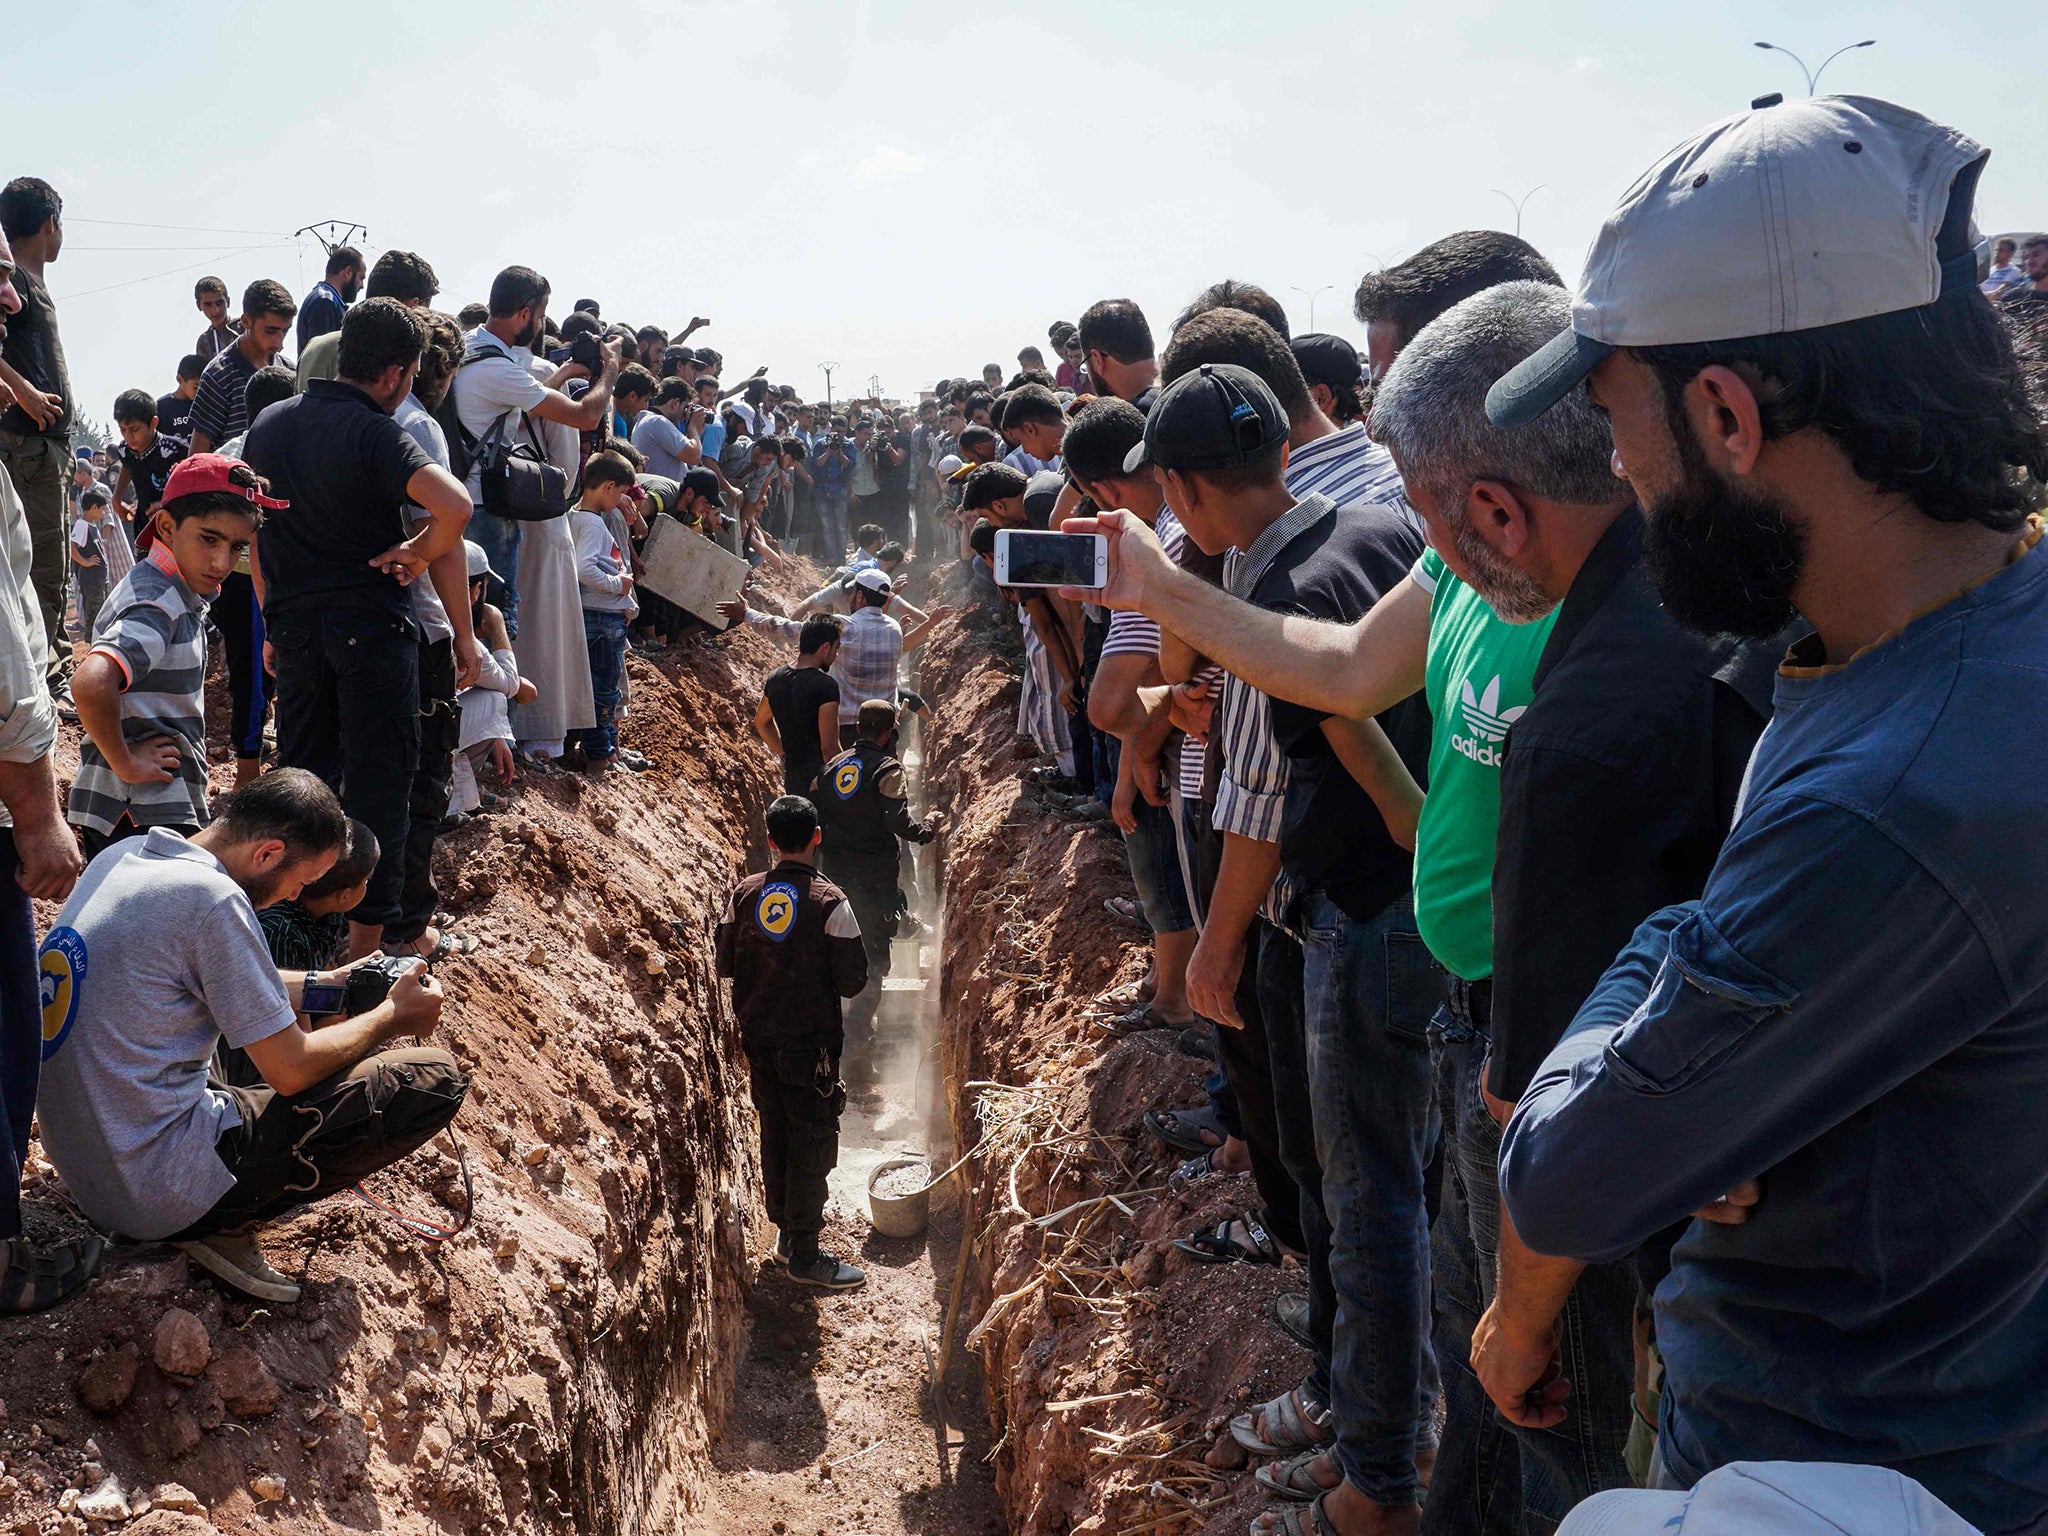 Members of the Syrian civil defence volunteers, also known as the White Helmets, bury their fellow comrades during a funeral in Sarmin, a jihadist-held town nine kilometres east of Syria's northwestern city of Idlib on August 12, 2017, after seven were shot dead early in the morning during a raid on their base, according to the organisation. The Syrian Observatory for Human Rights said the seven volunteers had all been killed by bullets to the head. "Two minibuses, some white helmets and walkie-talkies were stolen," the White Helmets said in statement. It was not immediately clear whether the robbery or the murders were the primary motive for the raid. / AFP PHOTO / OMAR HAJ KADOUROMAR HAJ KADOUR/AFP/Getty Images